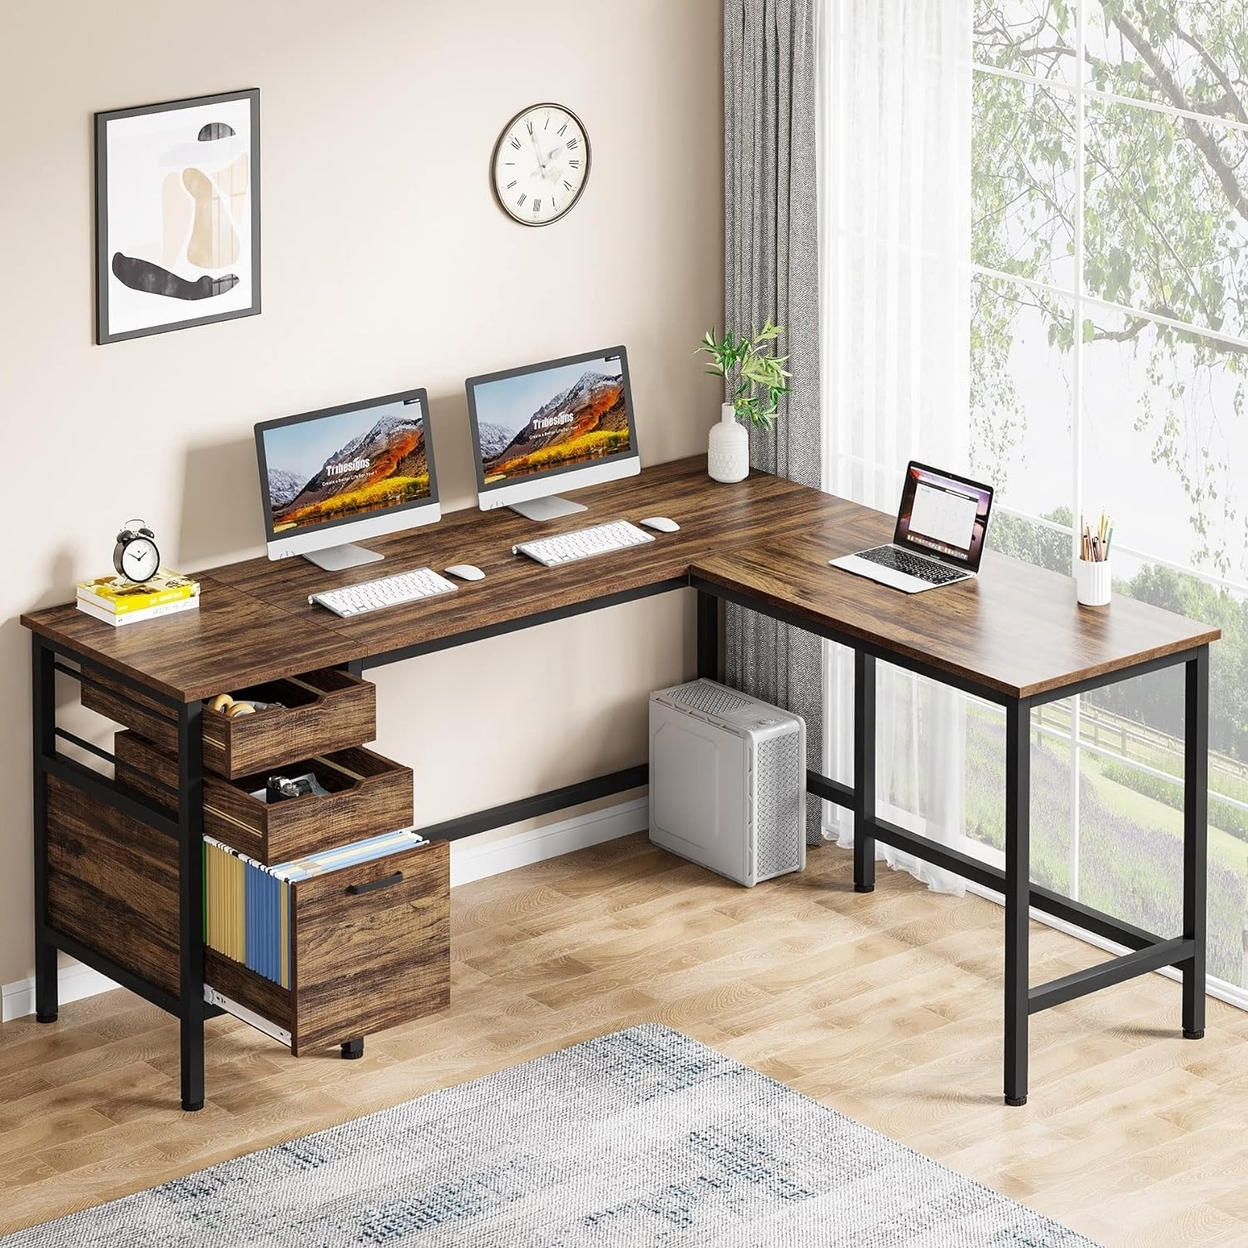 Tribesigns L Shaped Desk With File Drawer Cabinet, 59 Corner Desk L Shaped Computer Desk With Drawers - Rustic Brown